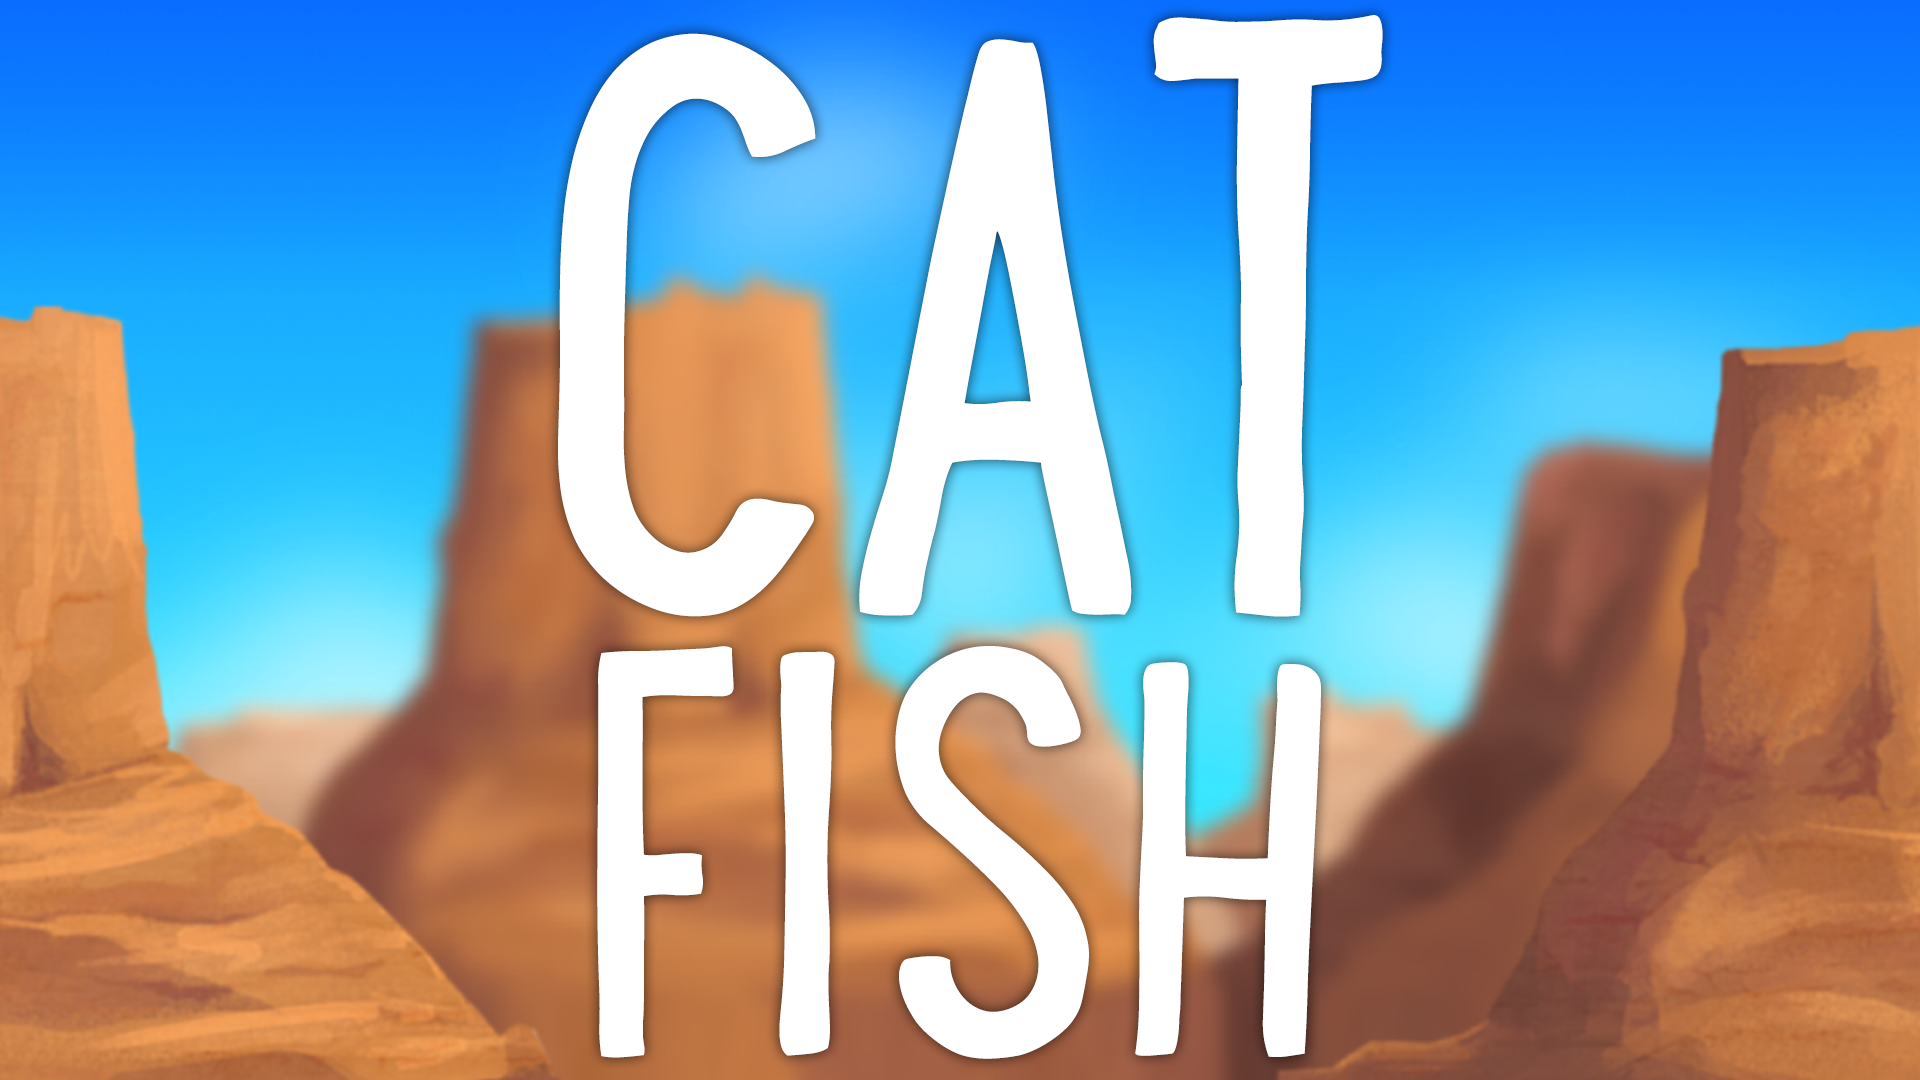 Icon for The Catfish Challenge